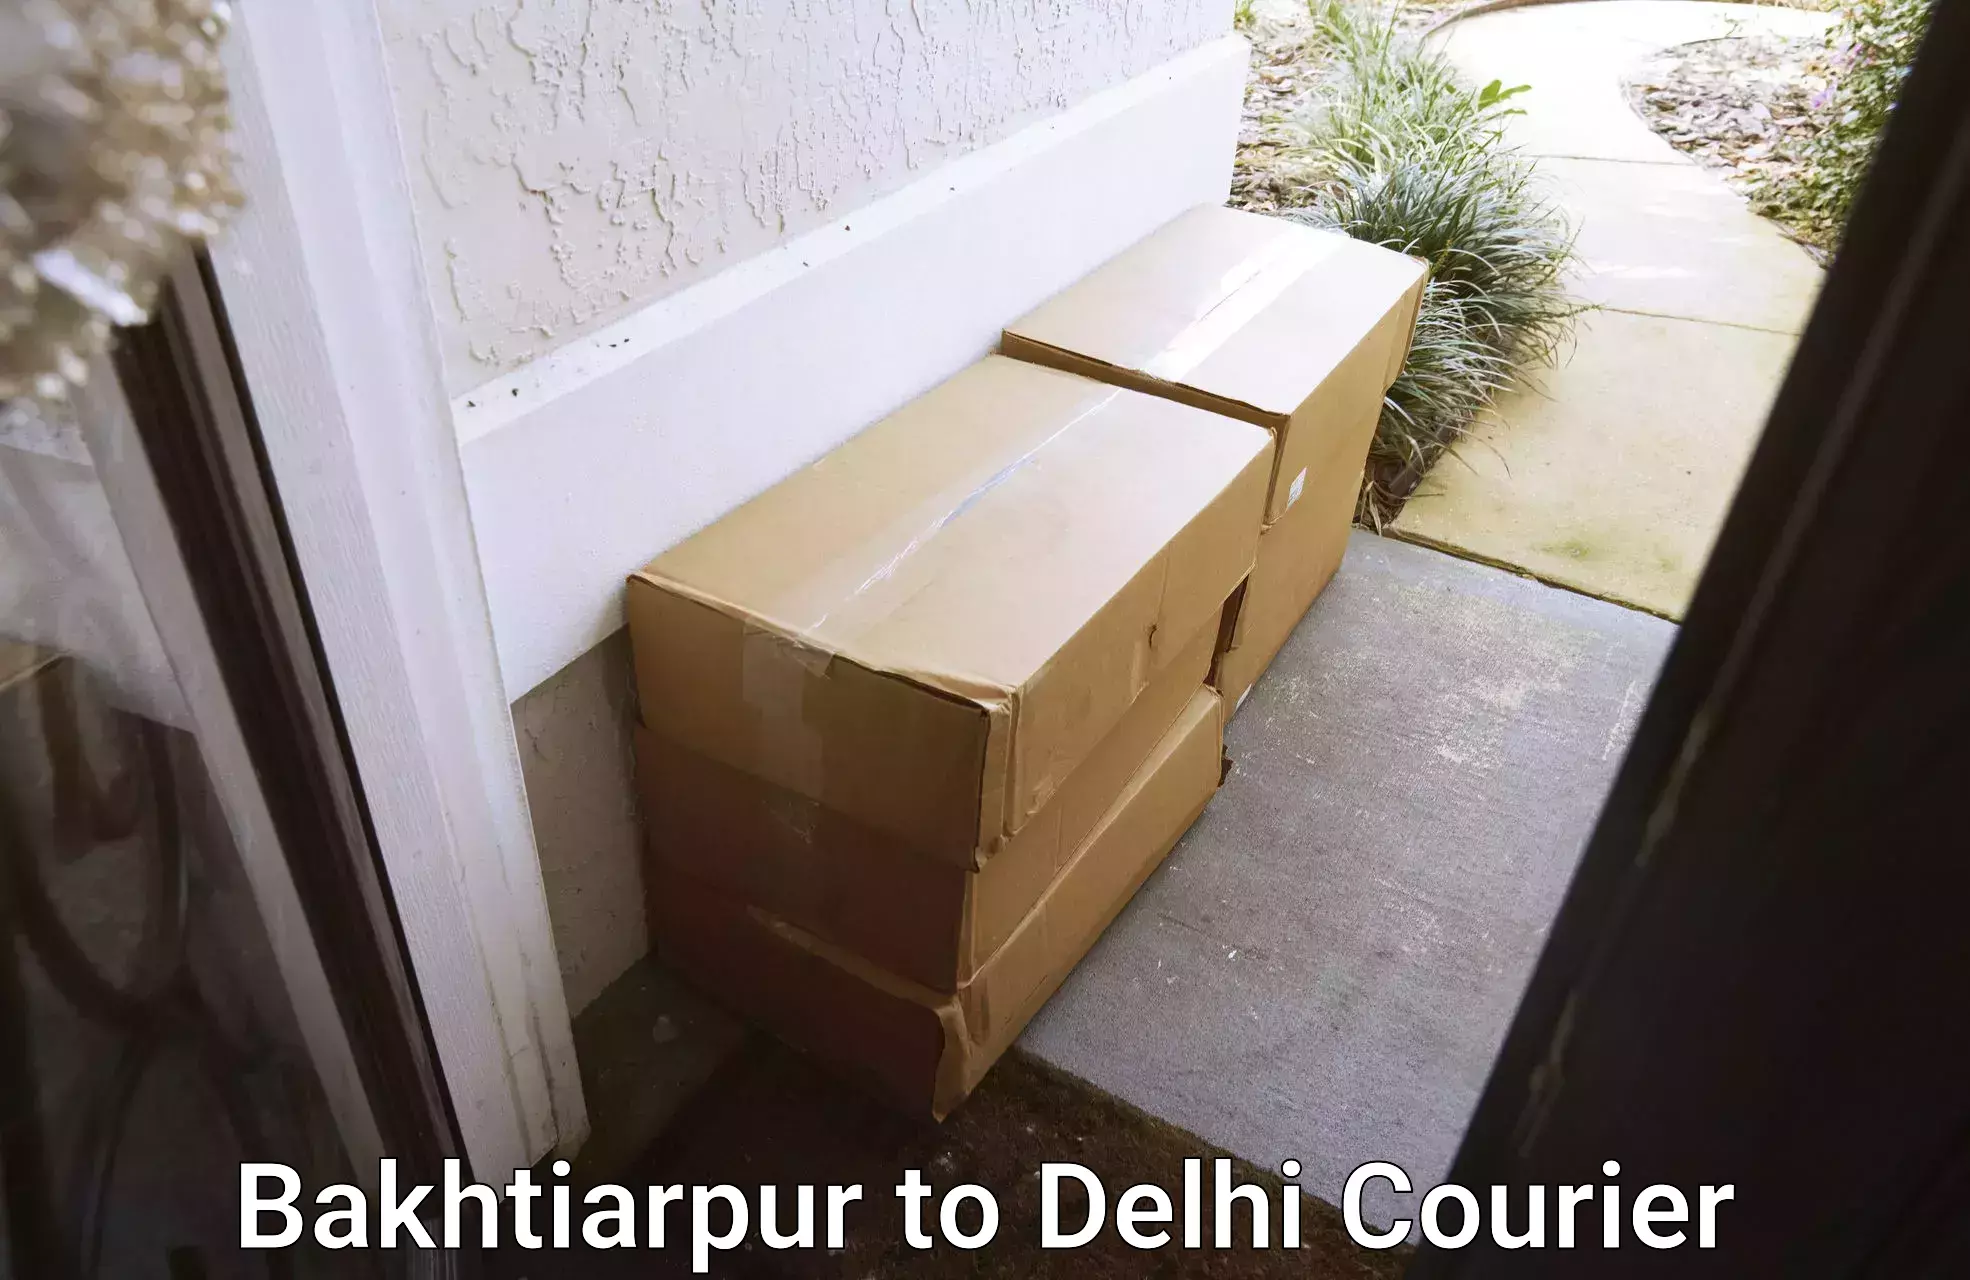 Furniture moving specialists Bakhtiarpur to Lodhi Road